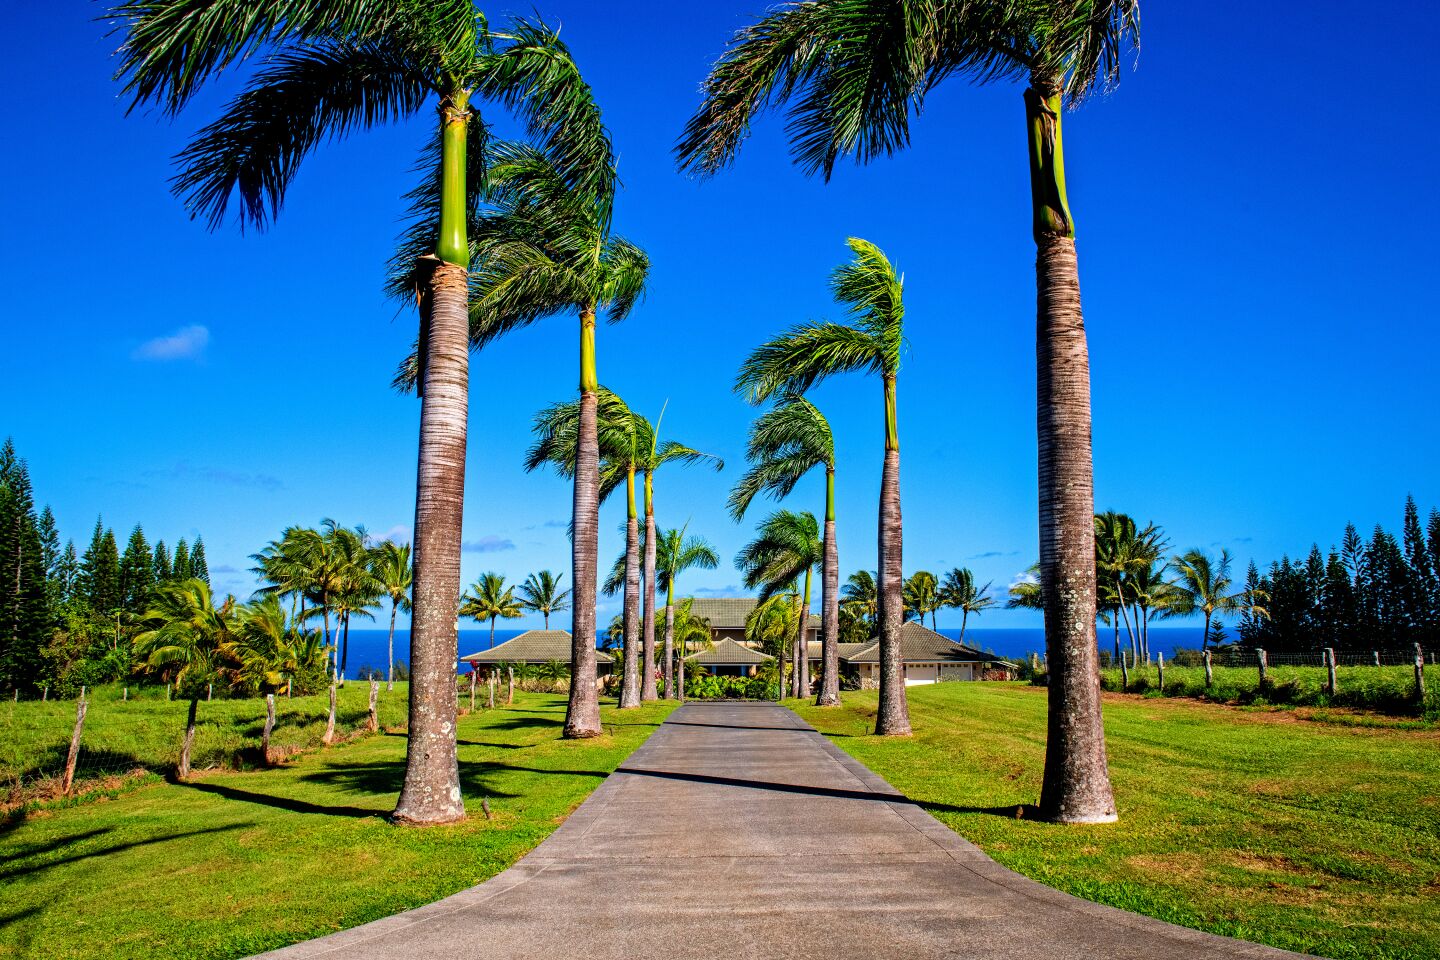 Palm trees line the long driveway approaching the estate.